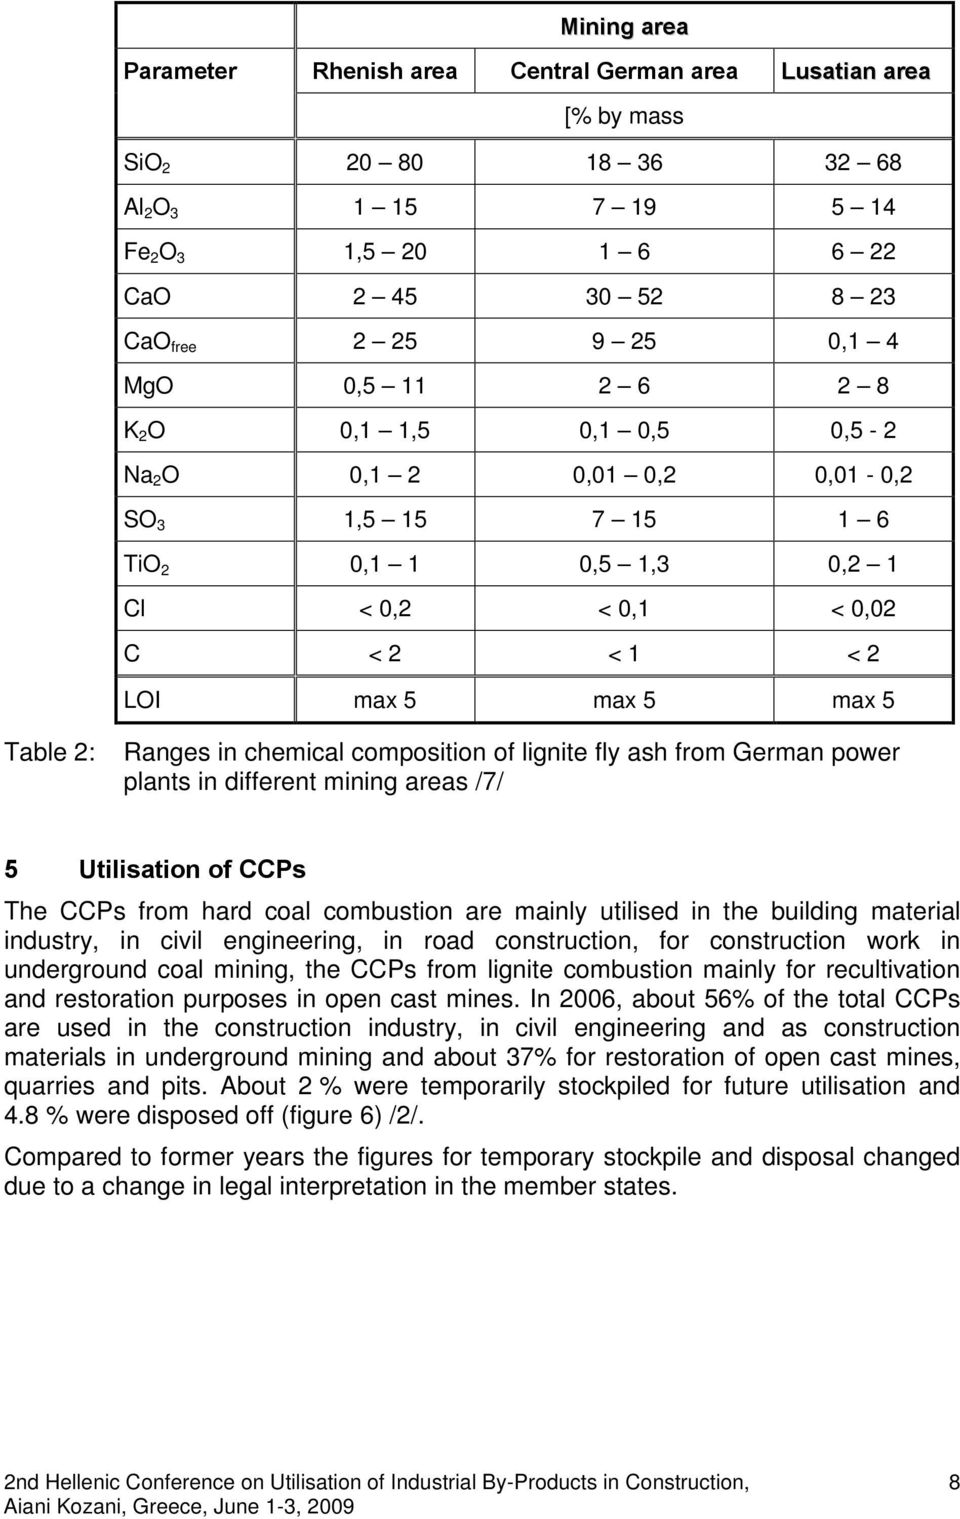 in chemical composition of lignite fly ash from German power plants in different mining areas /7/ 5 Utilisation of CCPs The CCPs from hard coal combustion are mainly utilised in the building material